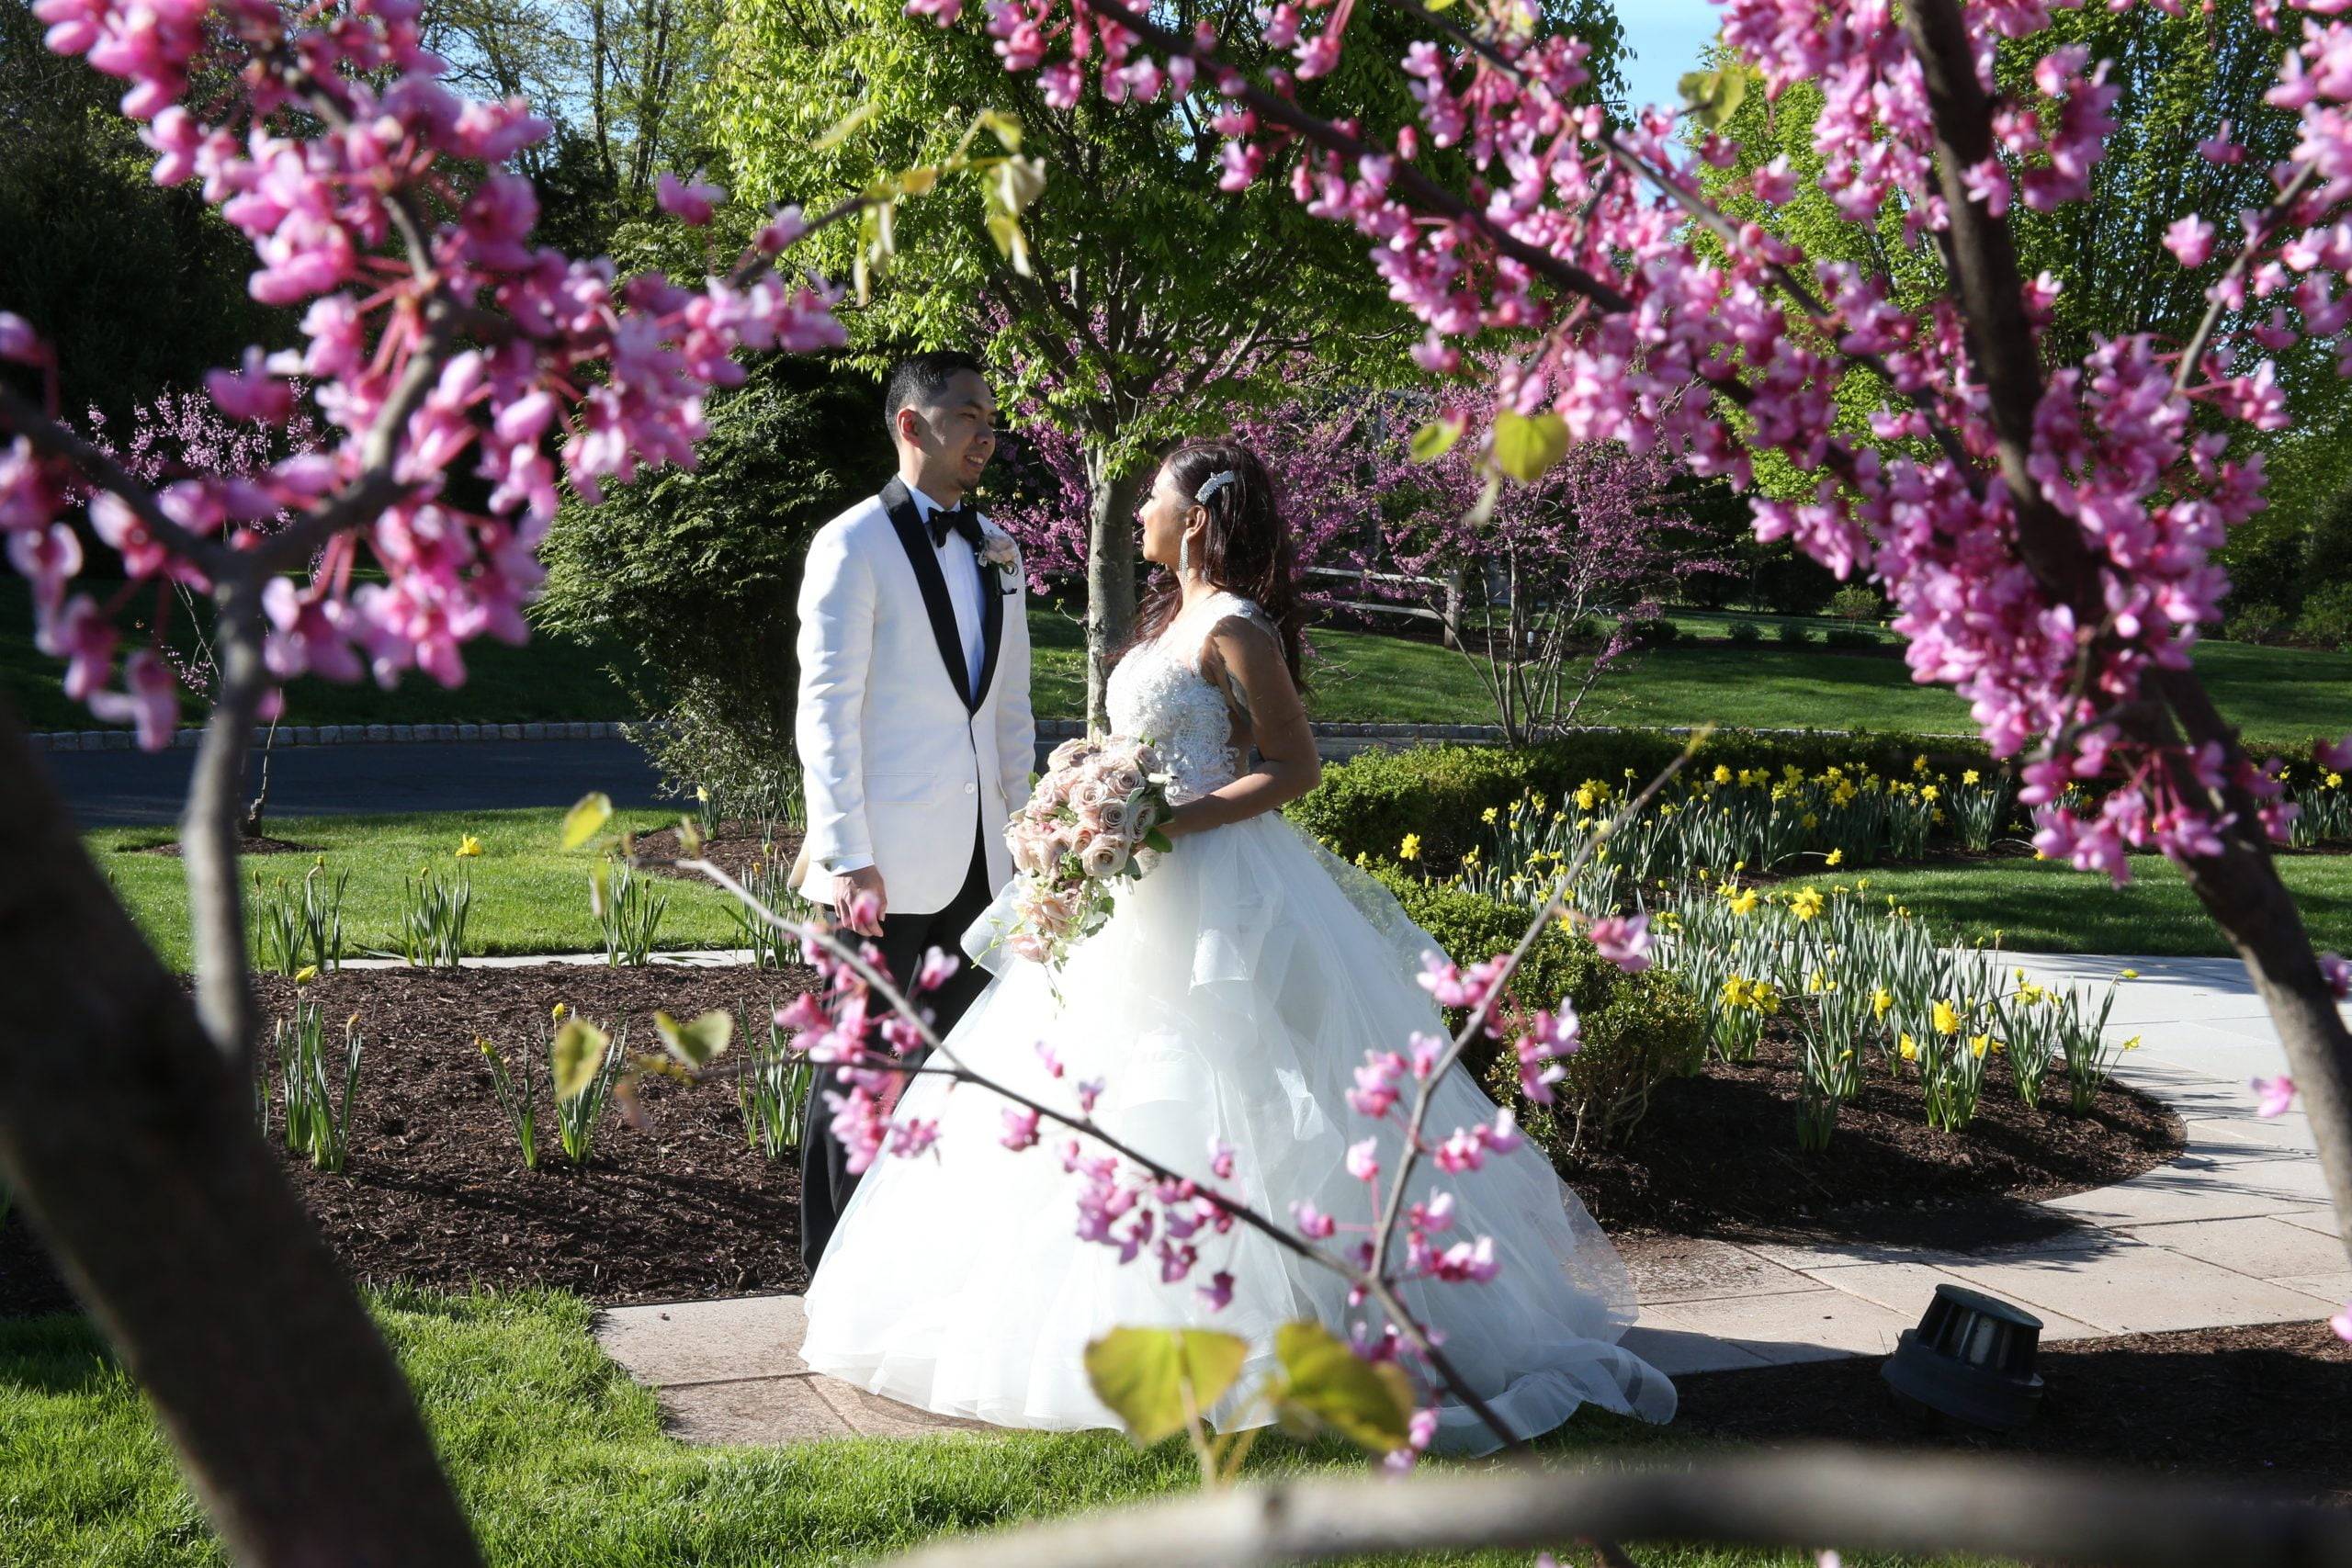 A bride and groom standing in front of a pink flowering tree.